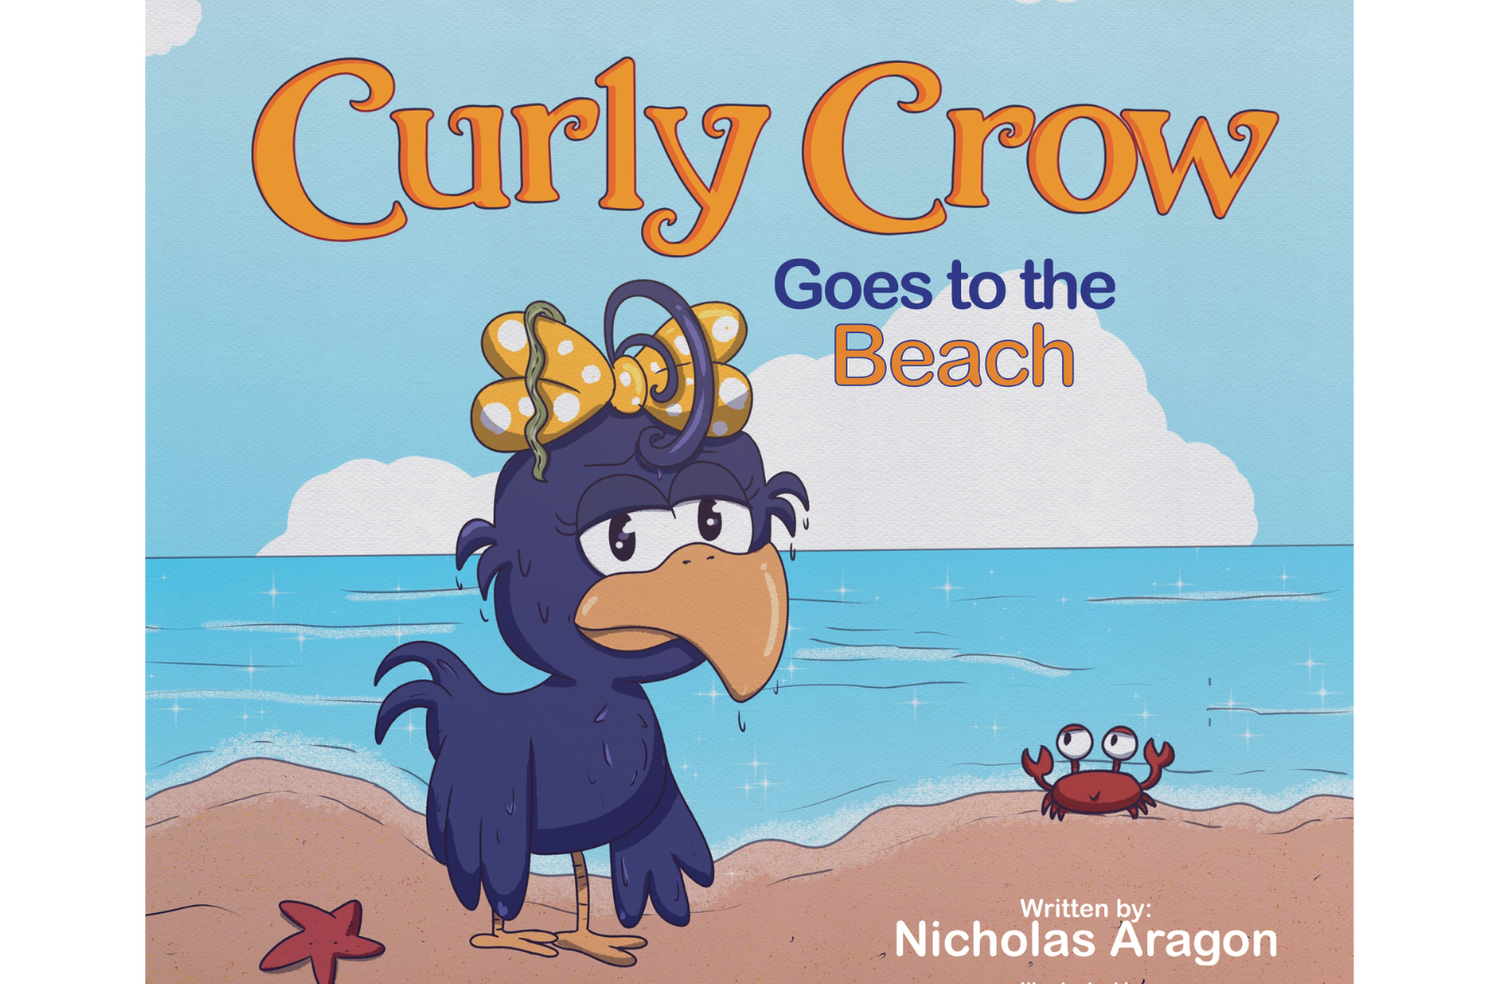 Children Illustration of Curly Crow at the Beach - Dealing with bullies 